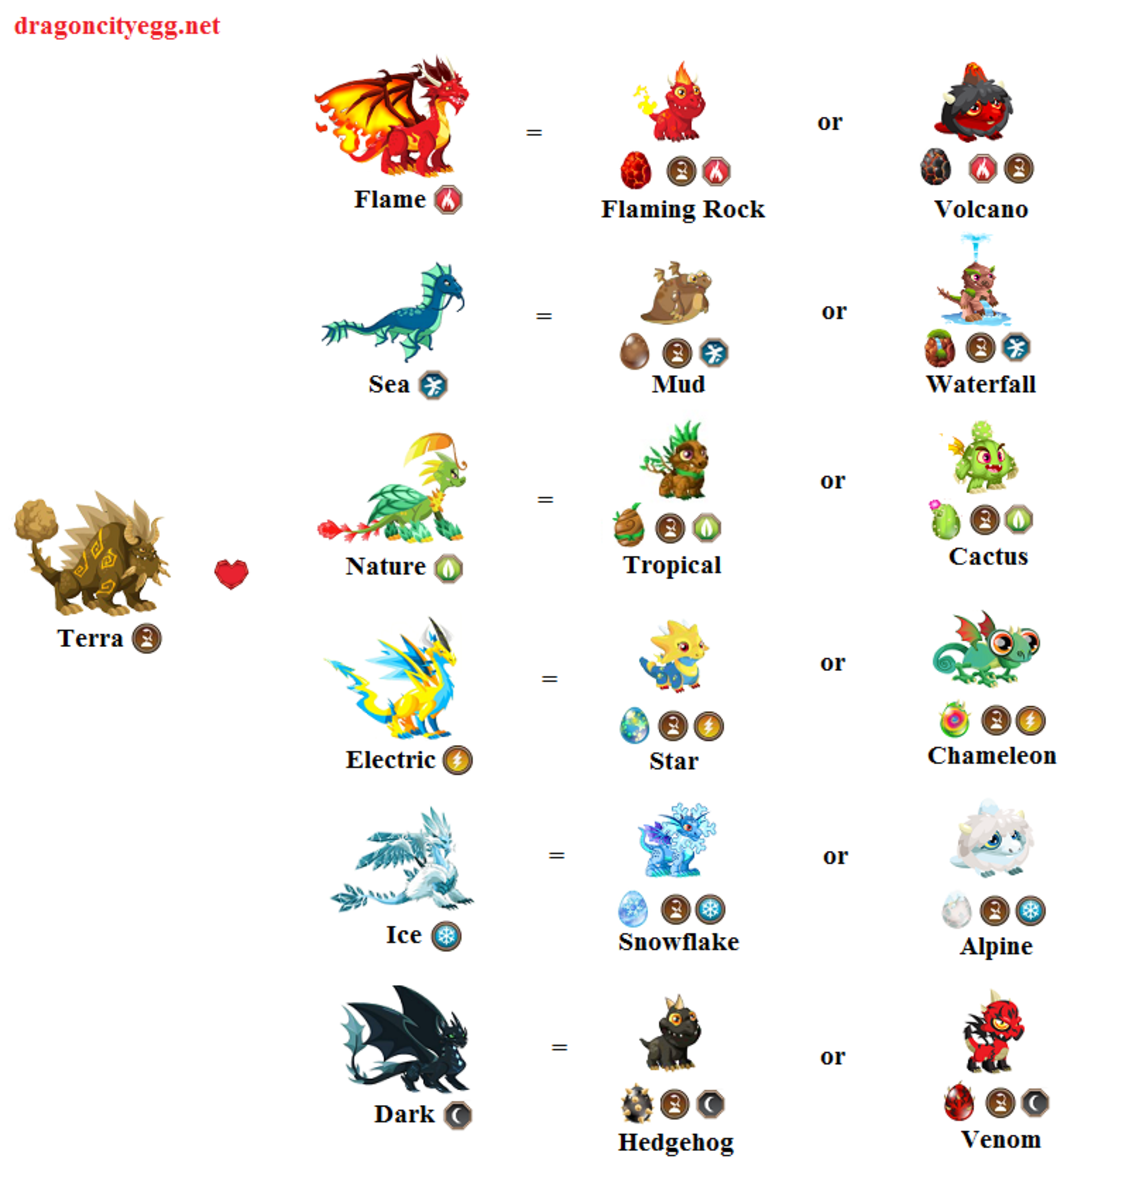 Dragon City Chart With Pictures